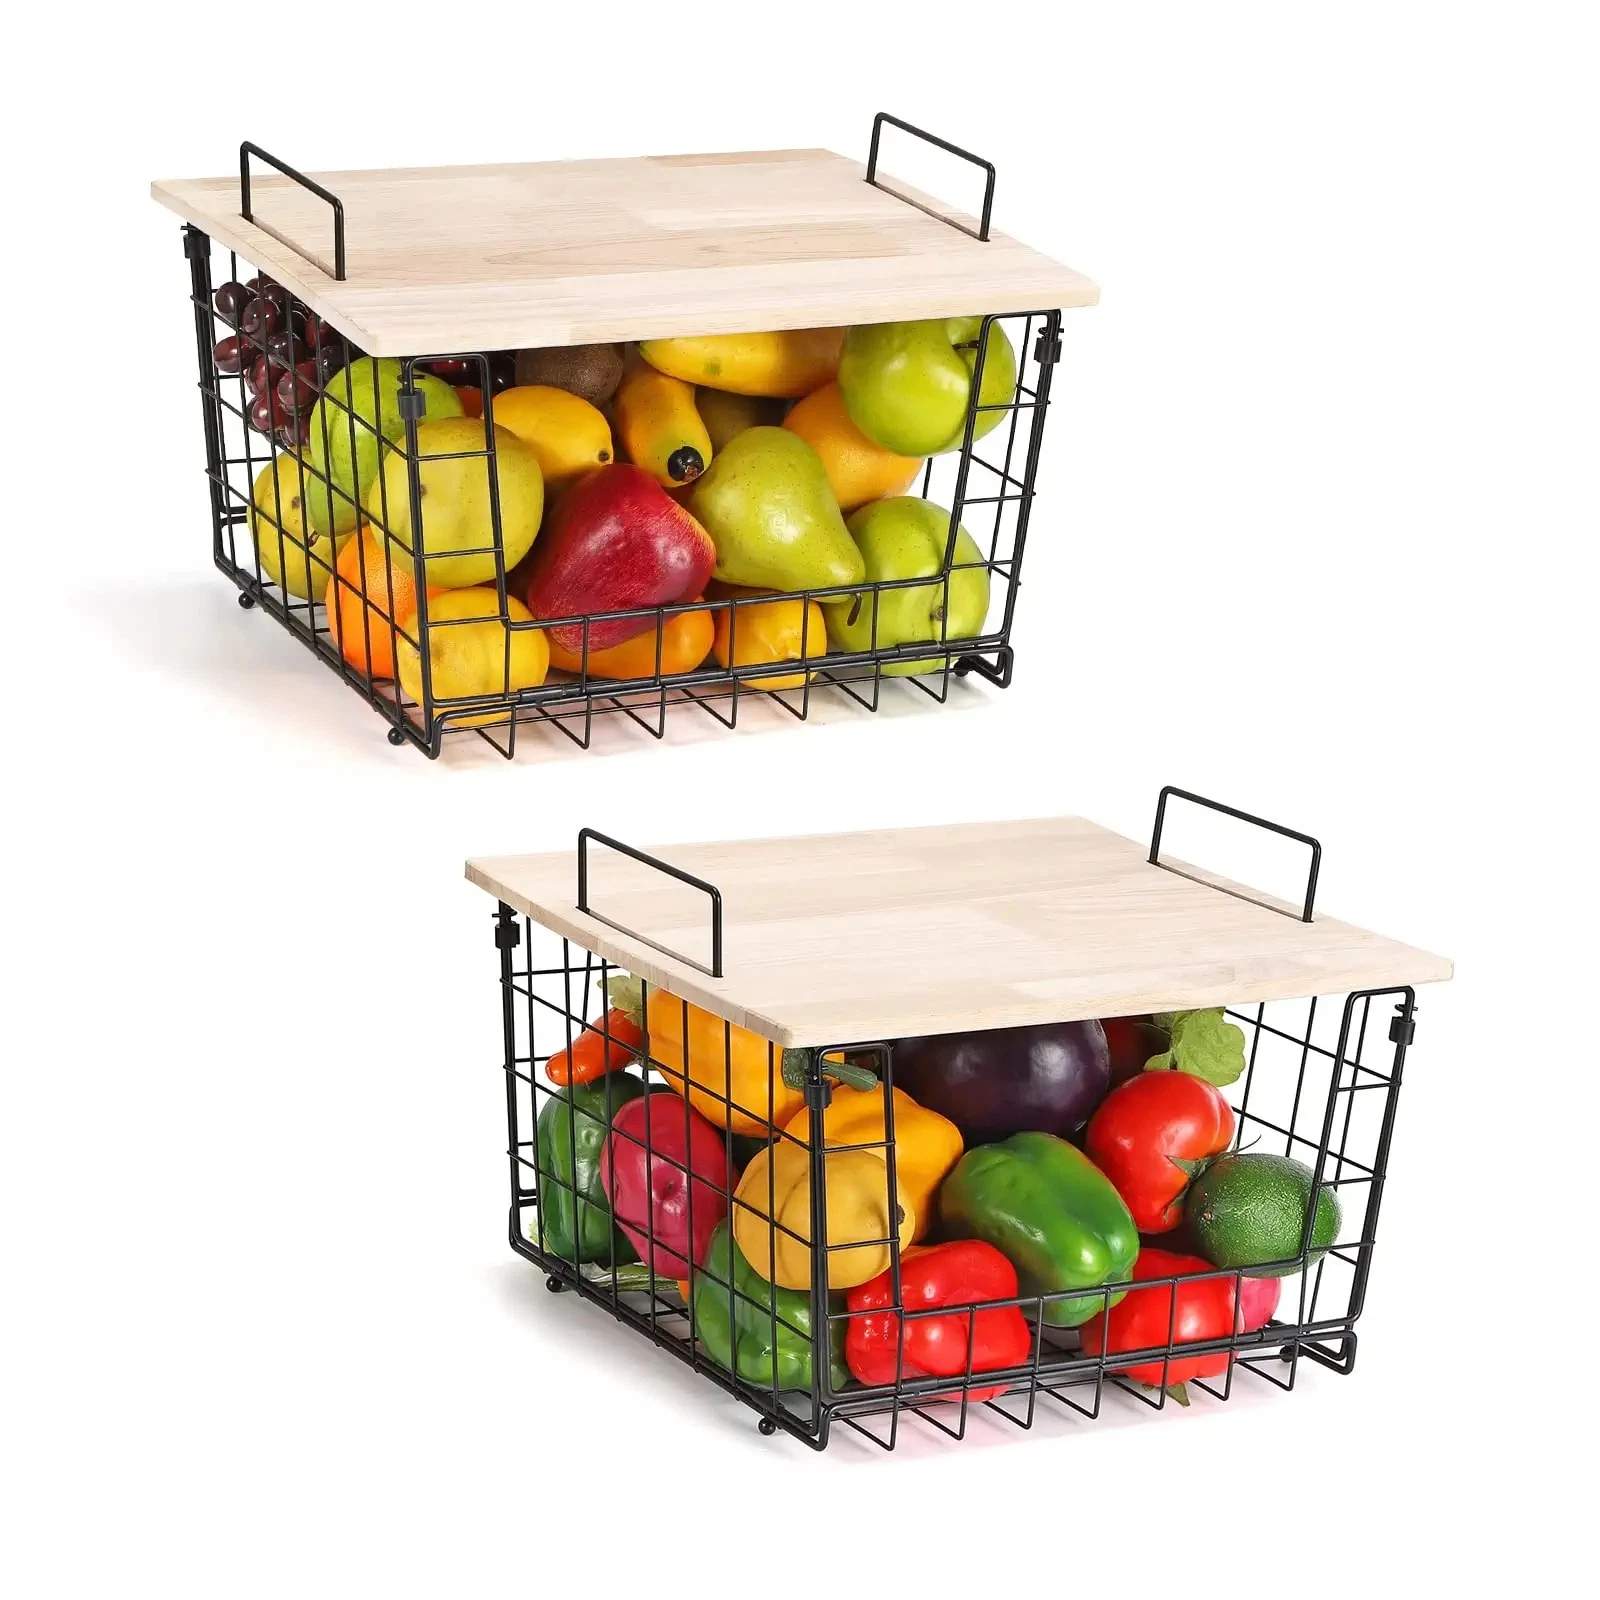 Best Selling Product Other Storage Baskets Wall Hanging Mesh Wire Pantry Fruit Organizer Metal Storage Wire Baskets with Lid